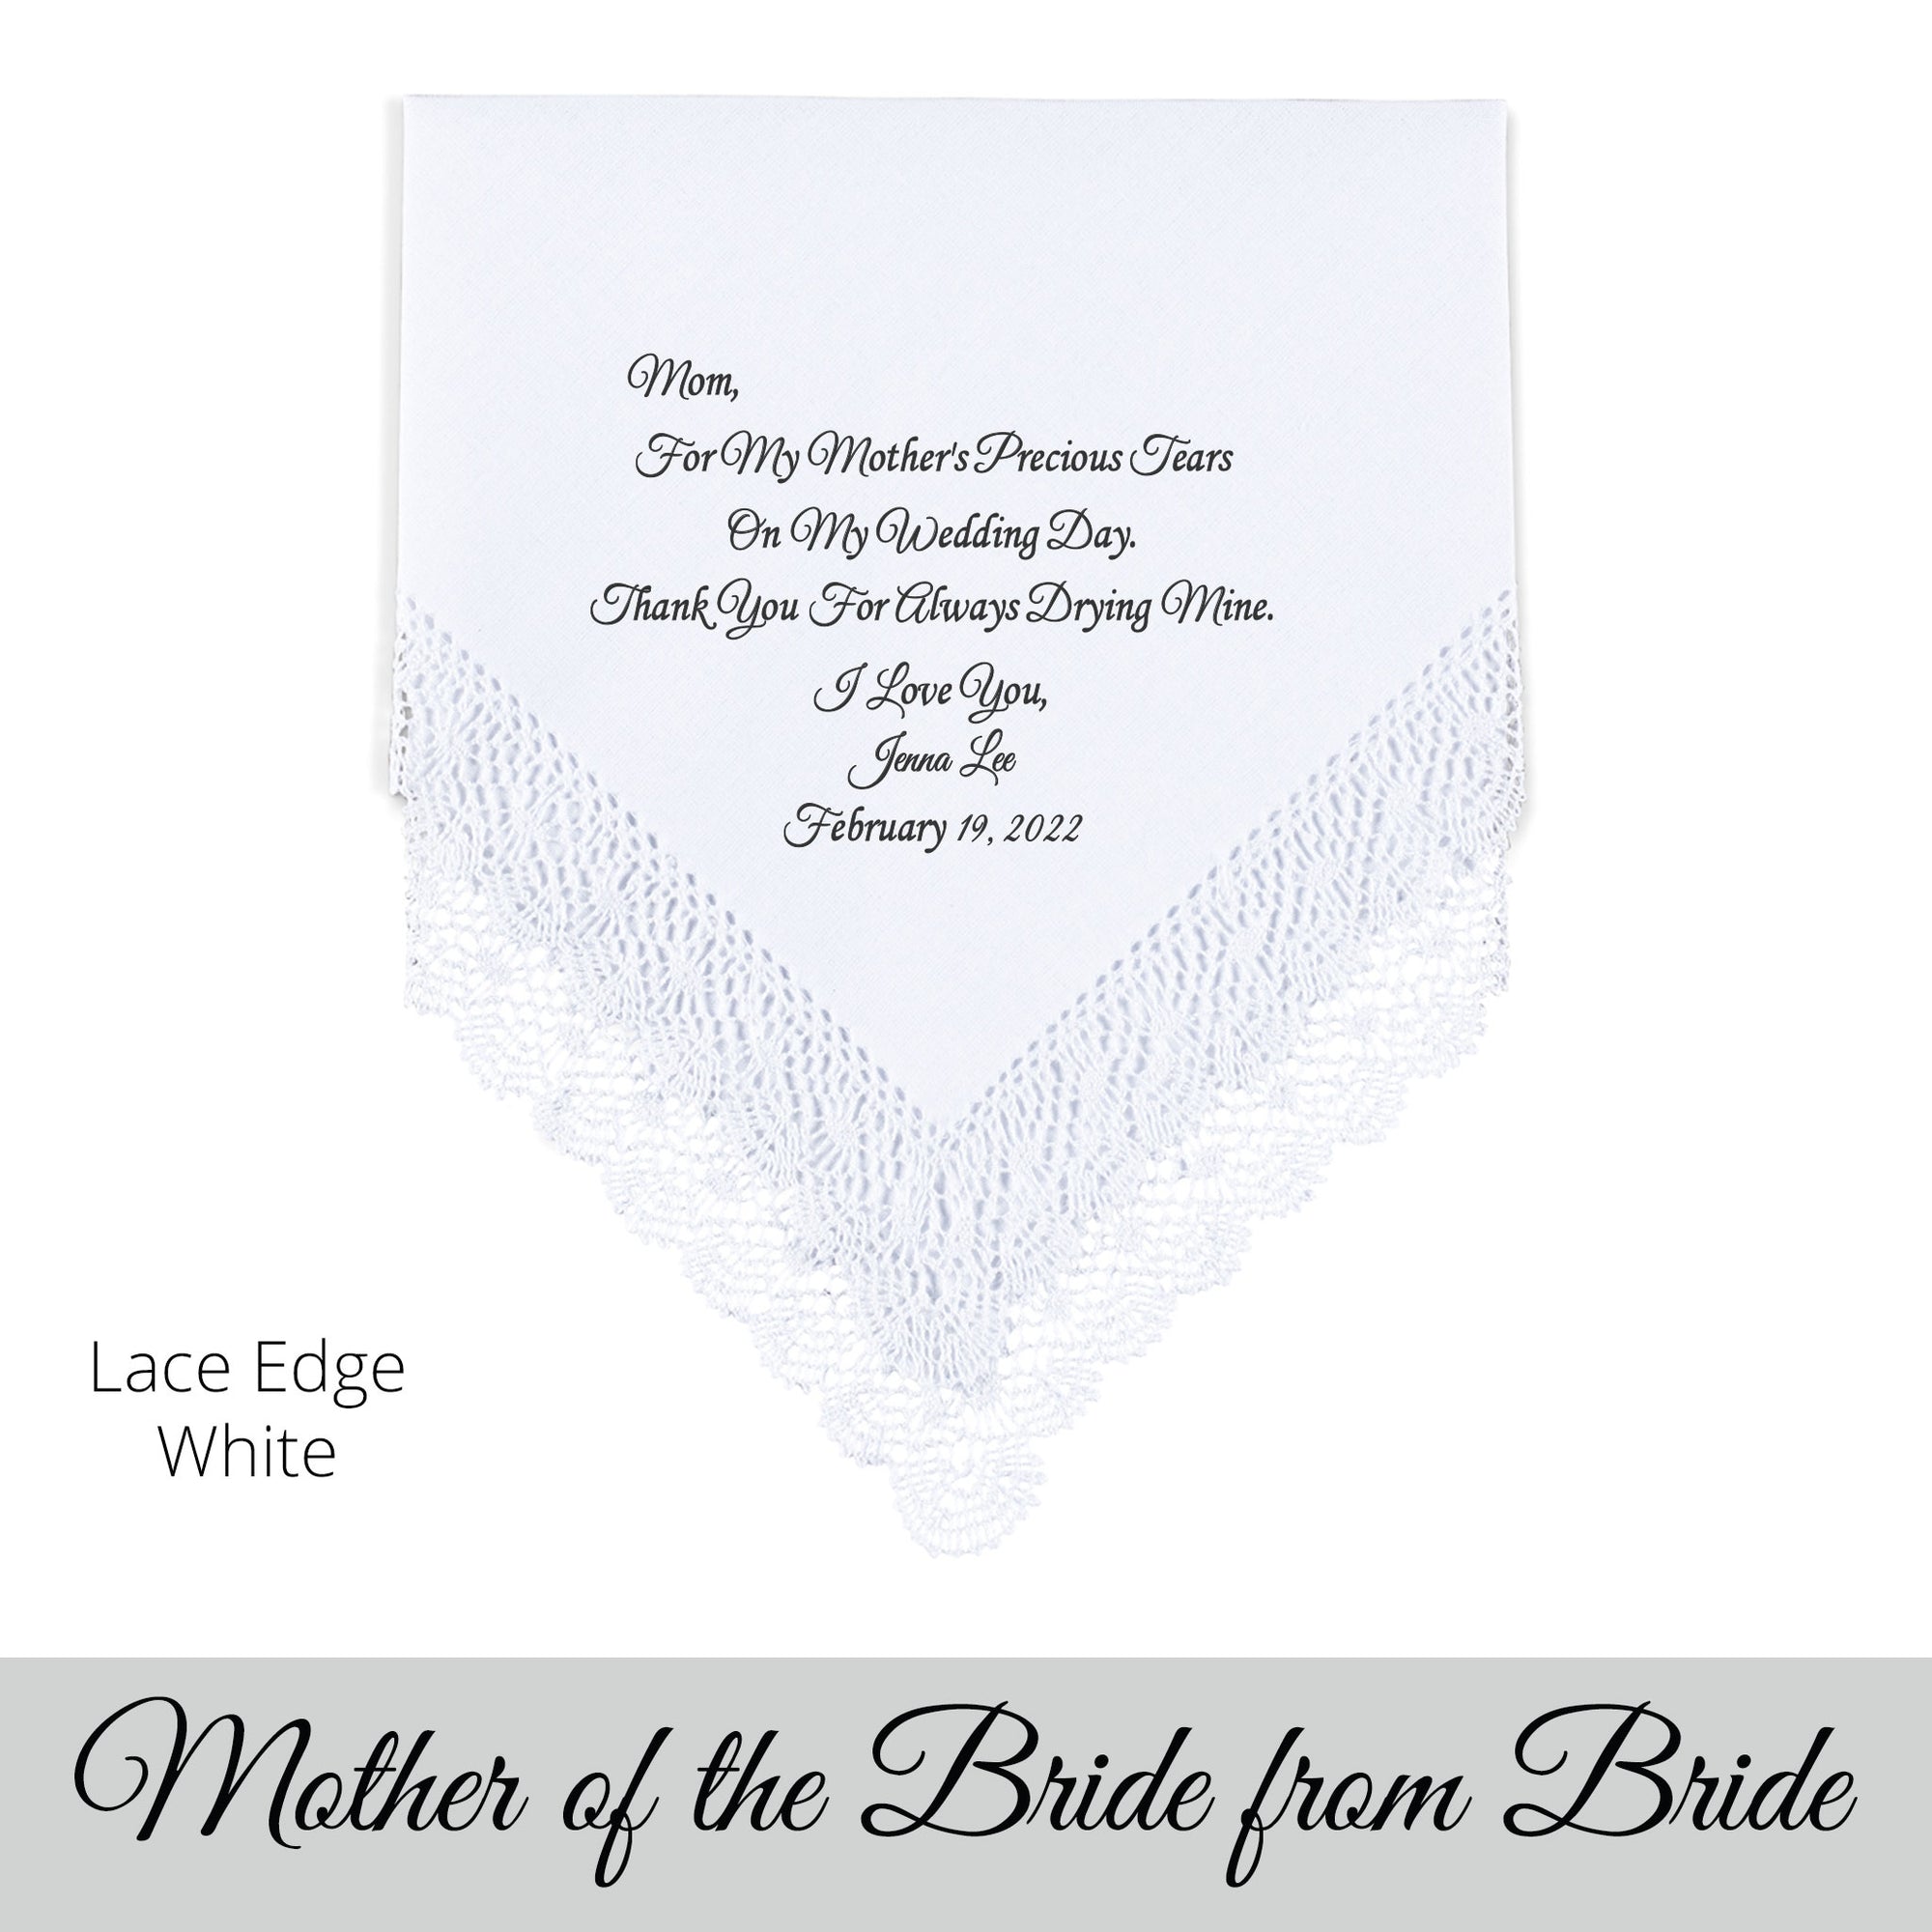 gift for the mother of the bride. Wedding Hankie with printed poem from the bride 